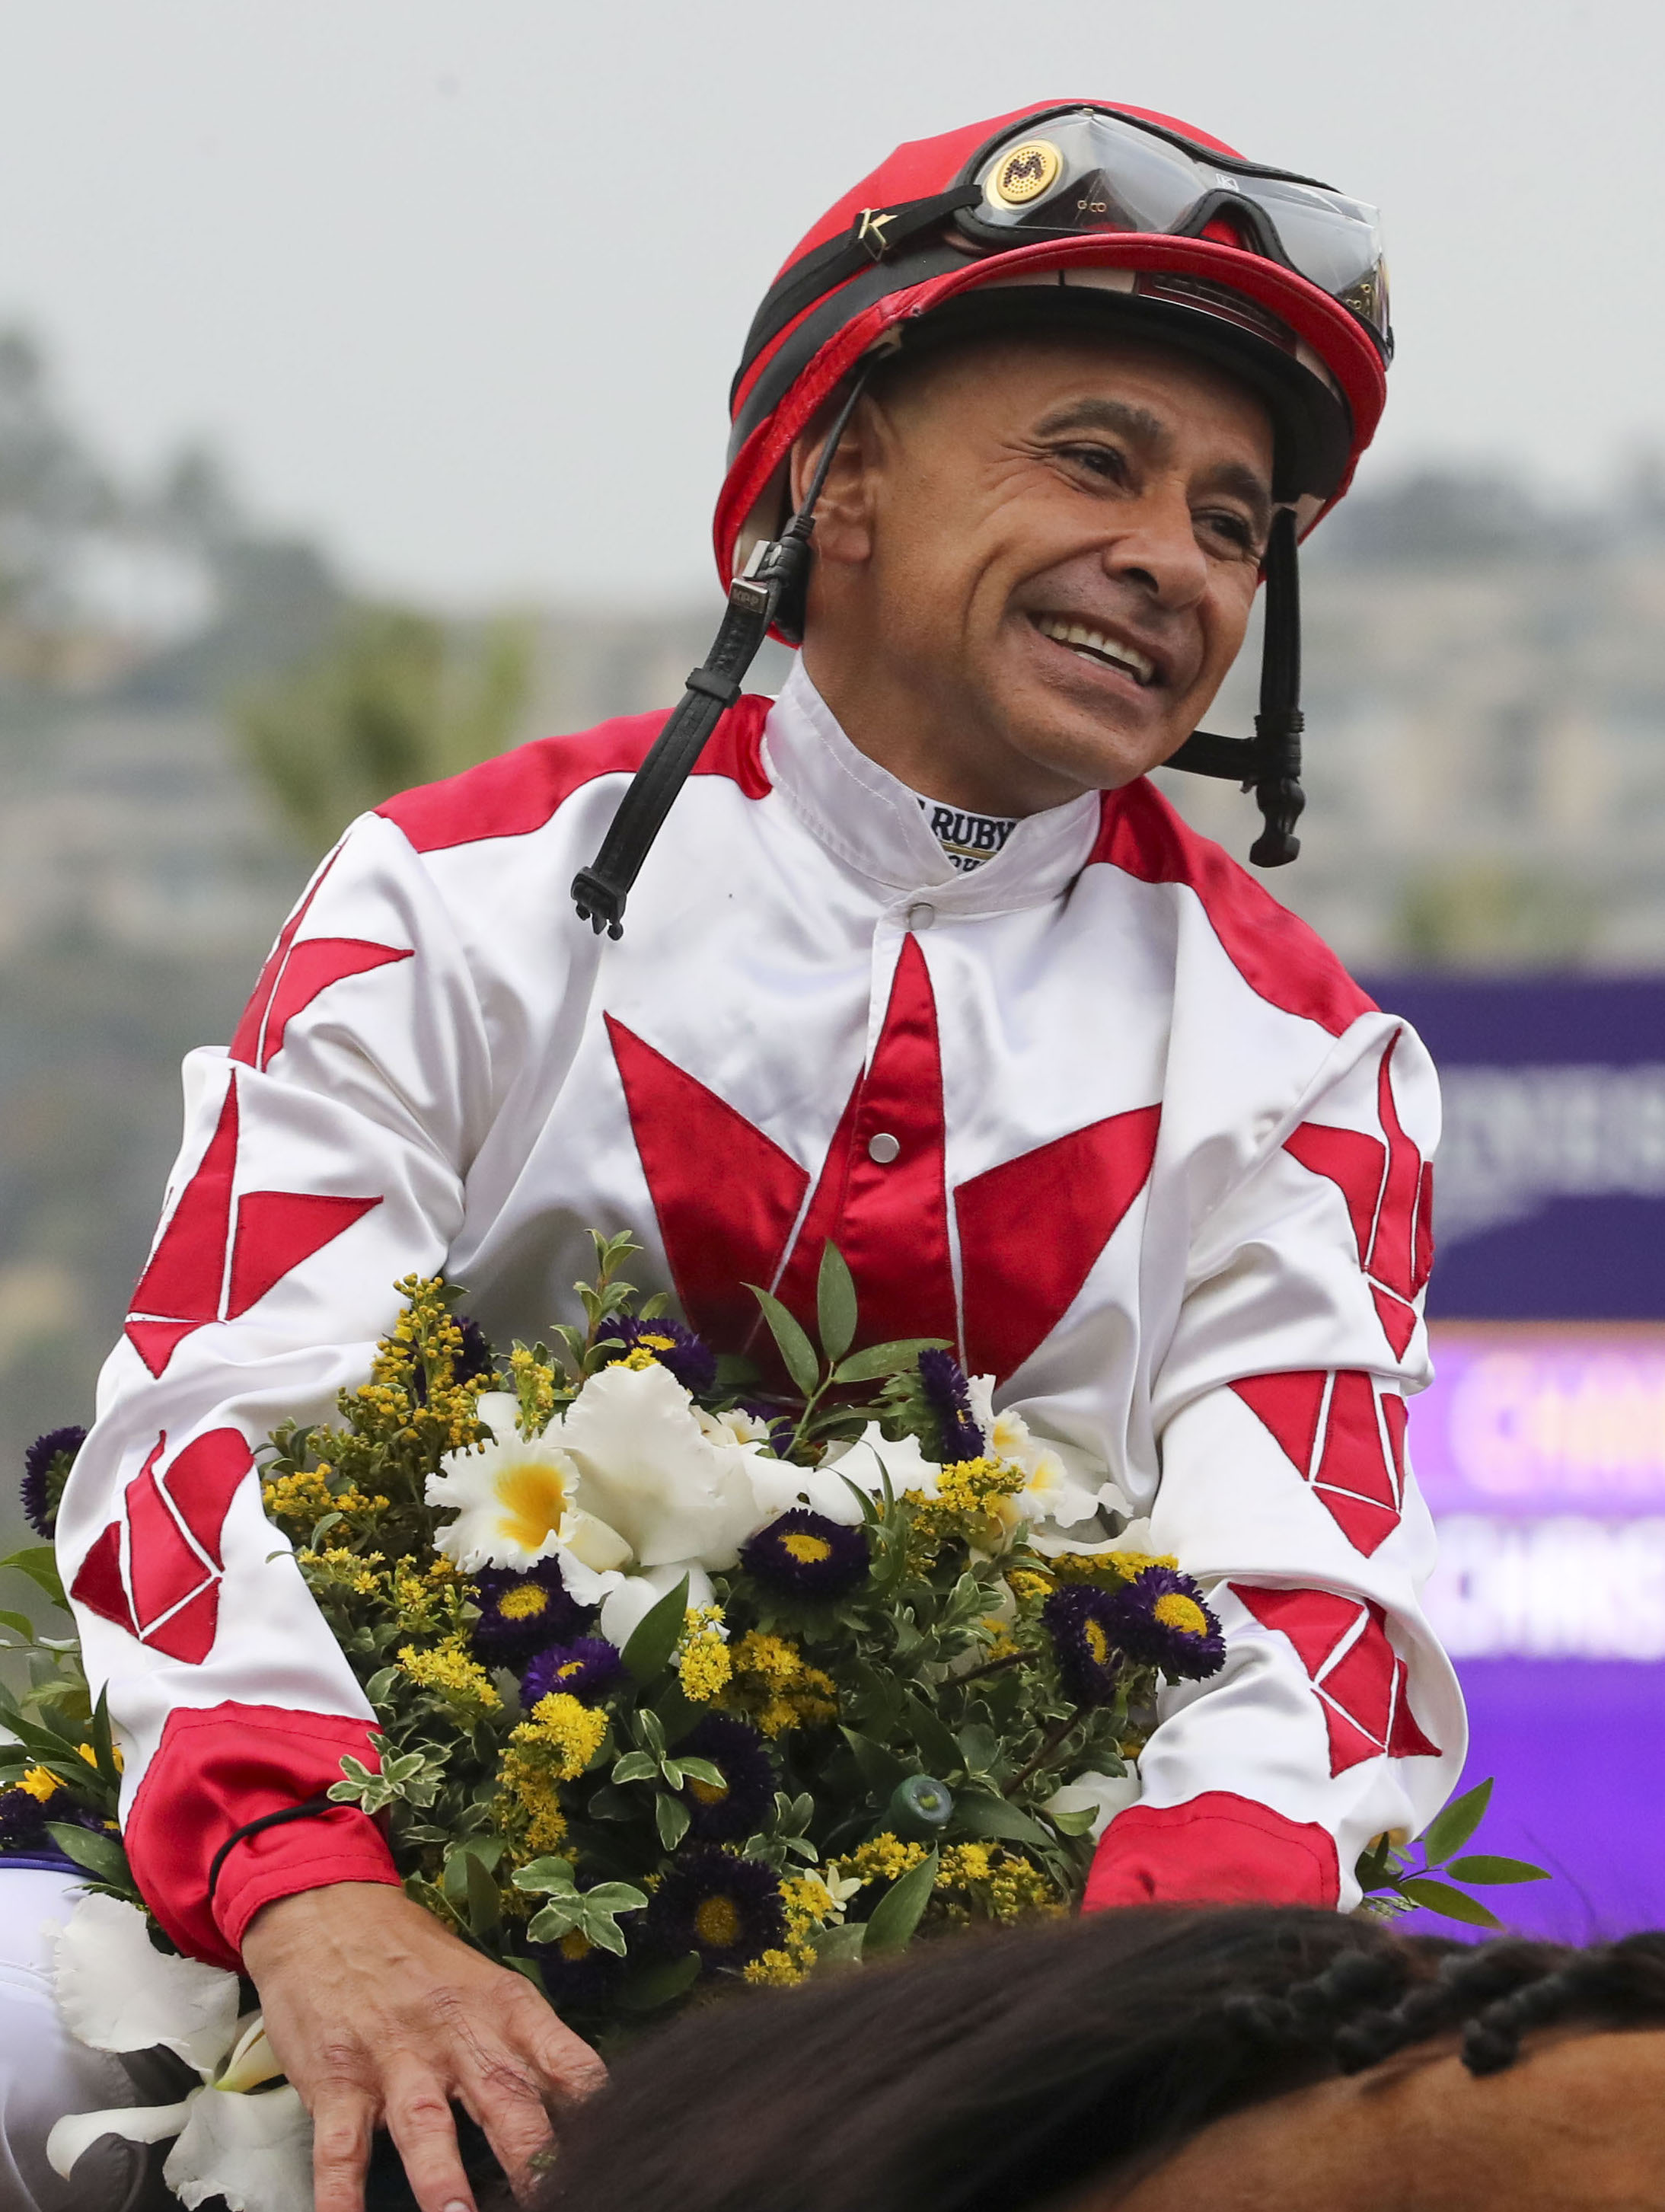 Mike Smith after winning last year’s Breeders’ Cup Juvenile Fillies at Del Mar on Corniche. Photo: Shamela Hanley/Breeders’ Cup/Eclipse Sportswire/CSM